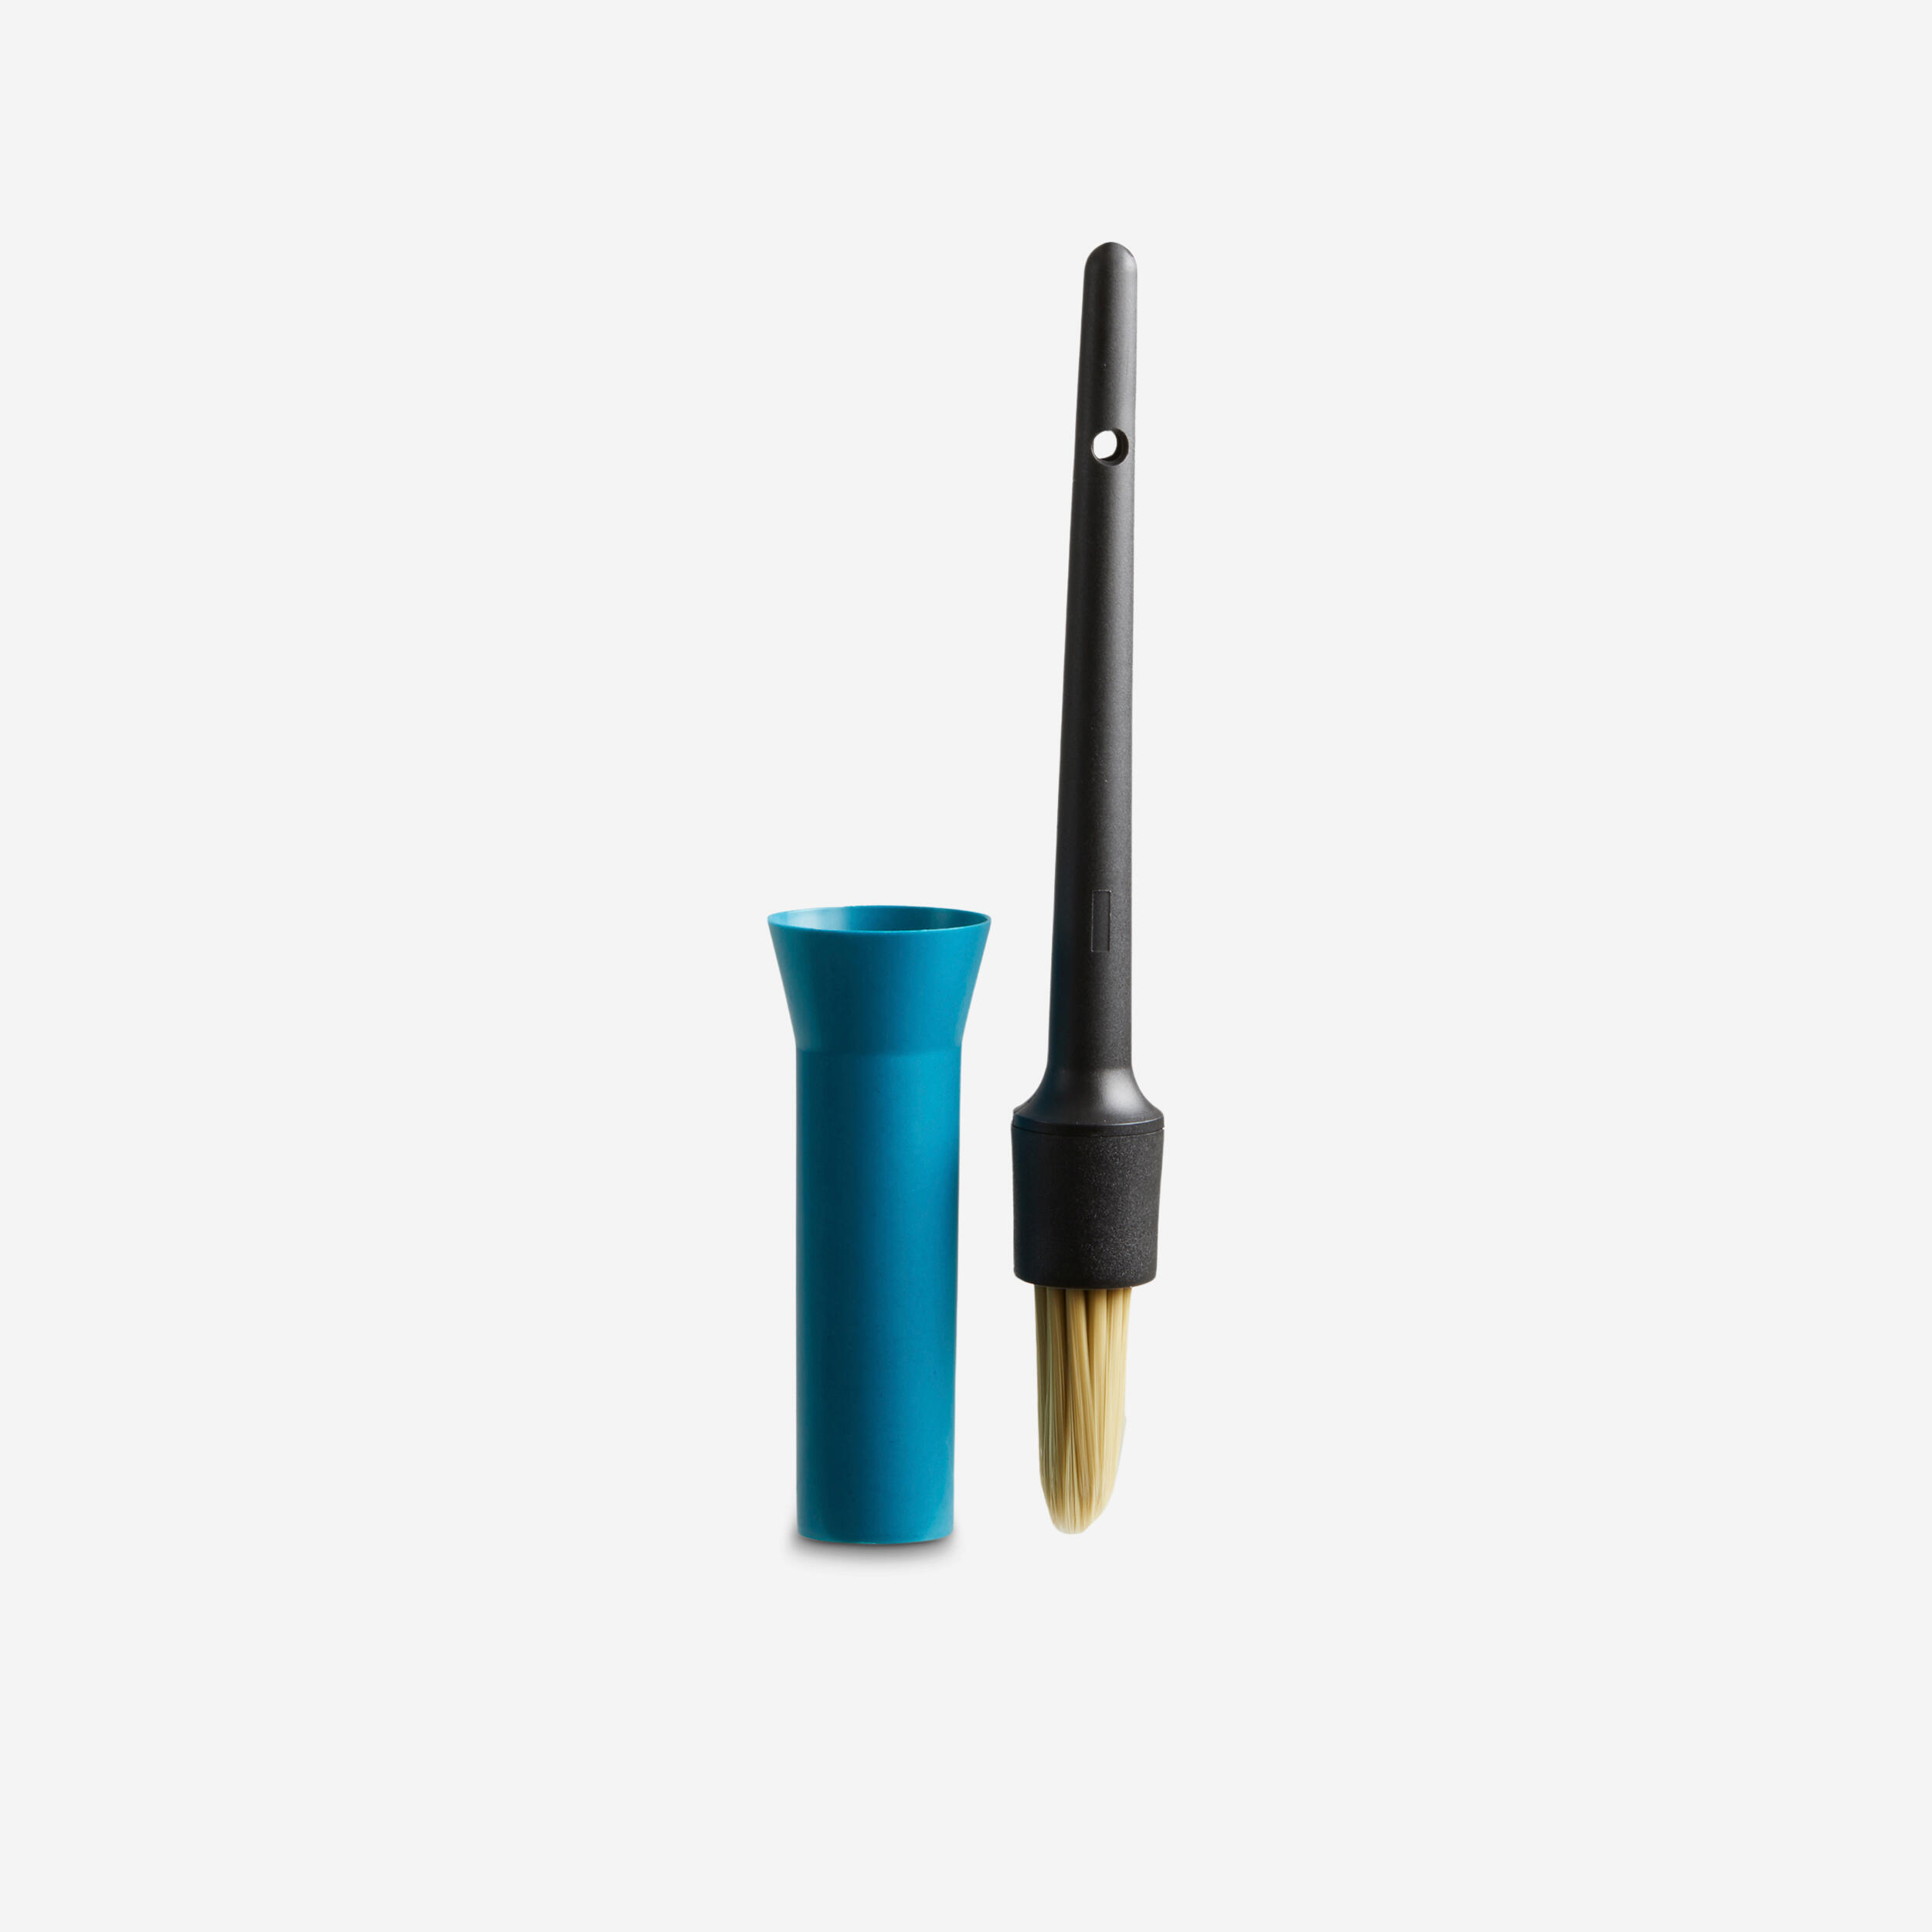 FOUGANZA Capped Equestrian Brush - Turquoise Blue